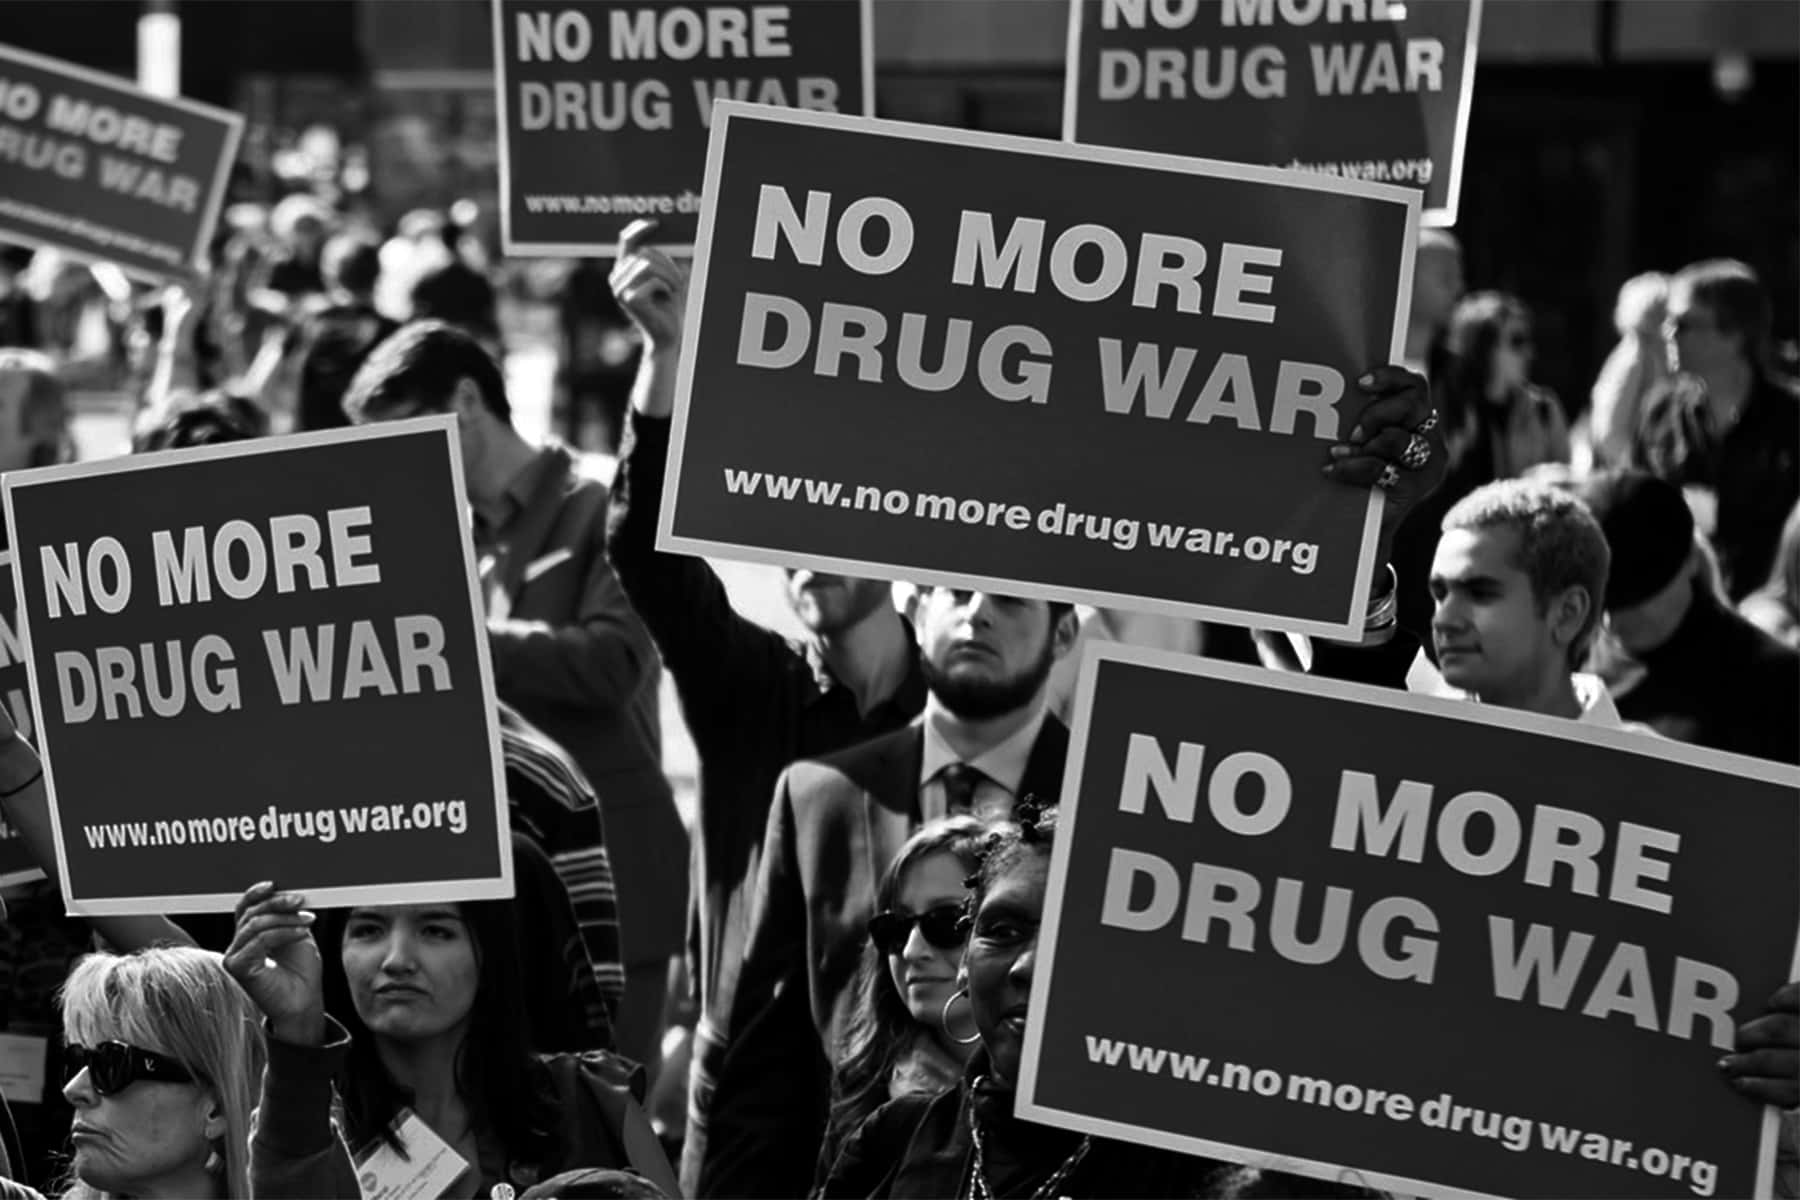 The War On Drugs Illegal Healthy Or